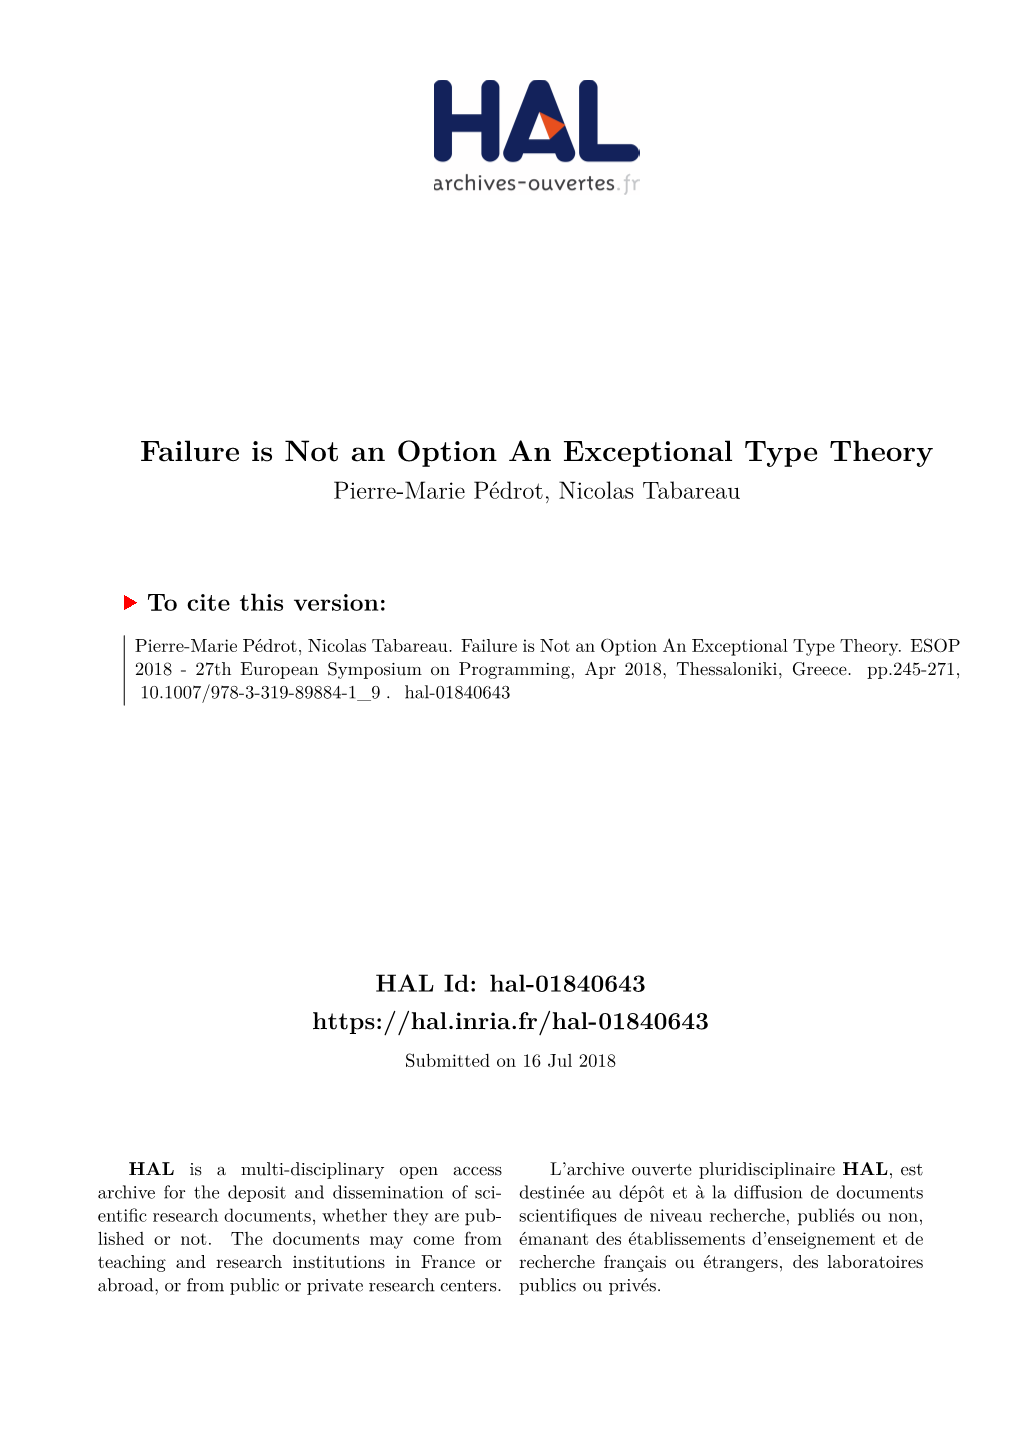 Failure Is Not an Option an Exceptional Type Theory Pierre-Marie Pédrot, Nicolas Tabareau